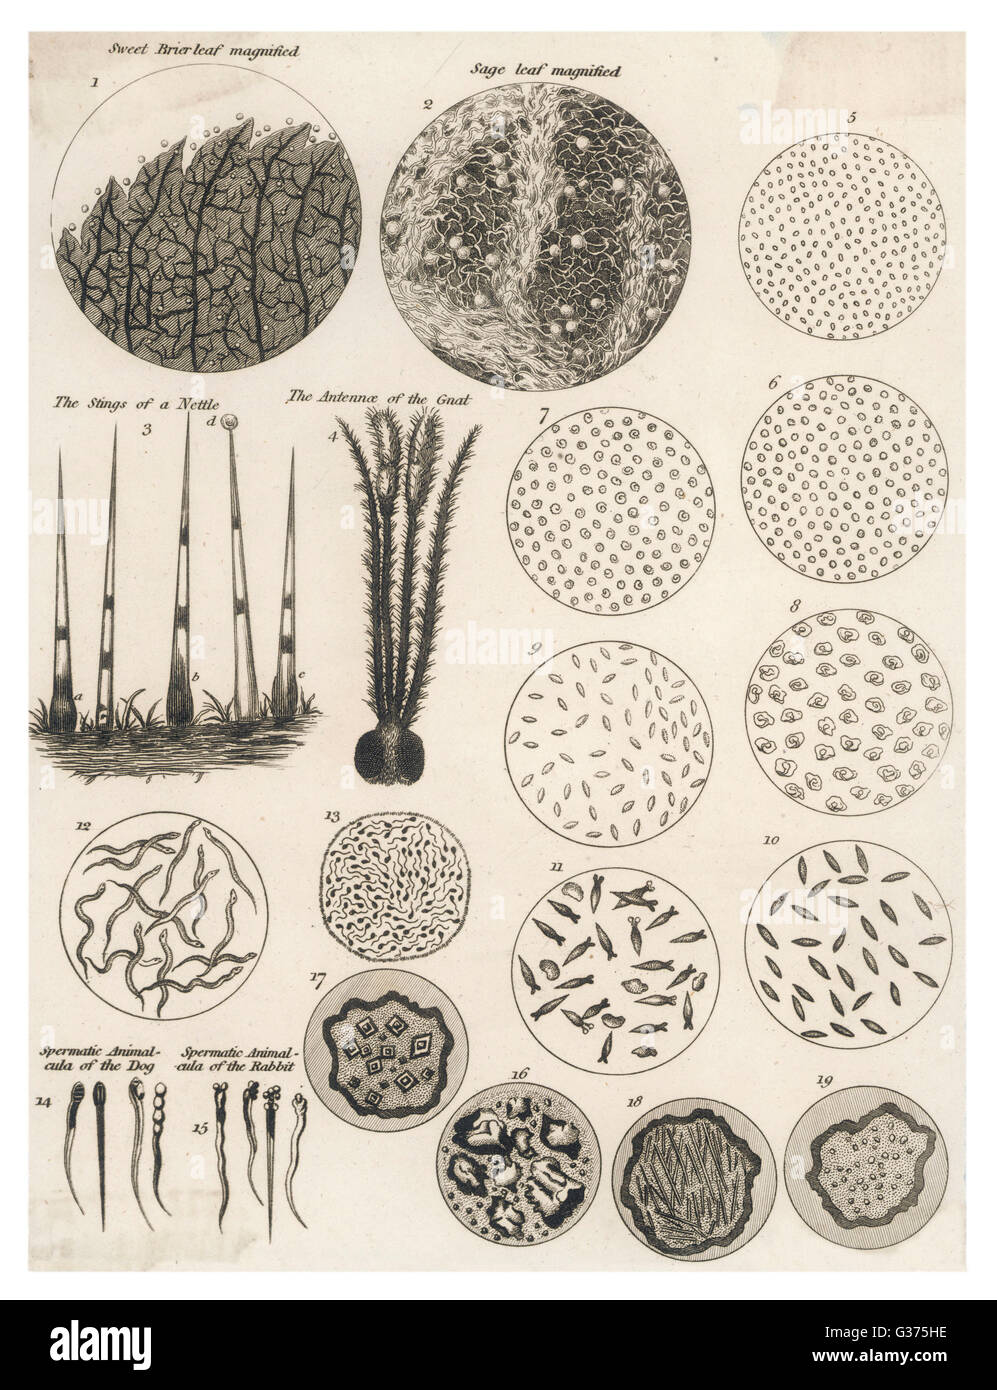 A variety of living and non- living objects magnified  through a microscope        Date: circa 1810 Stock Photo